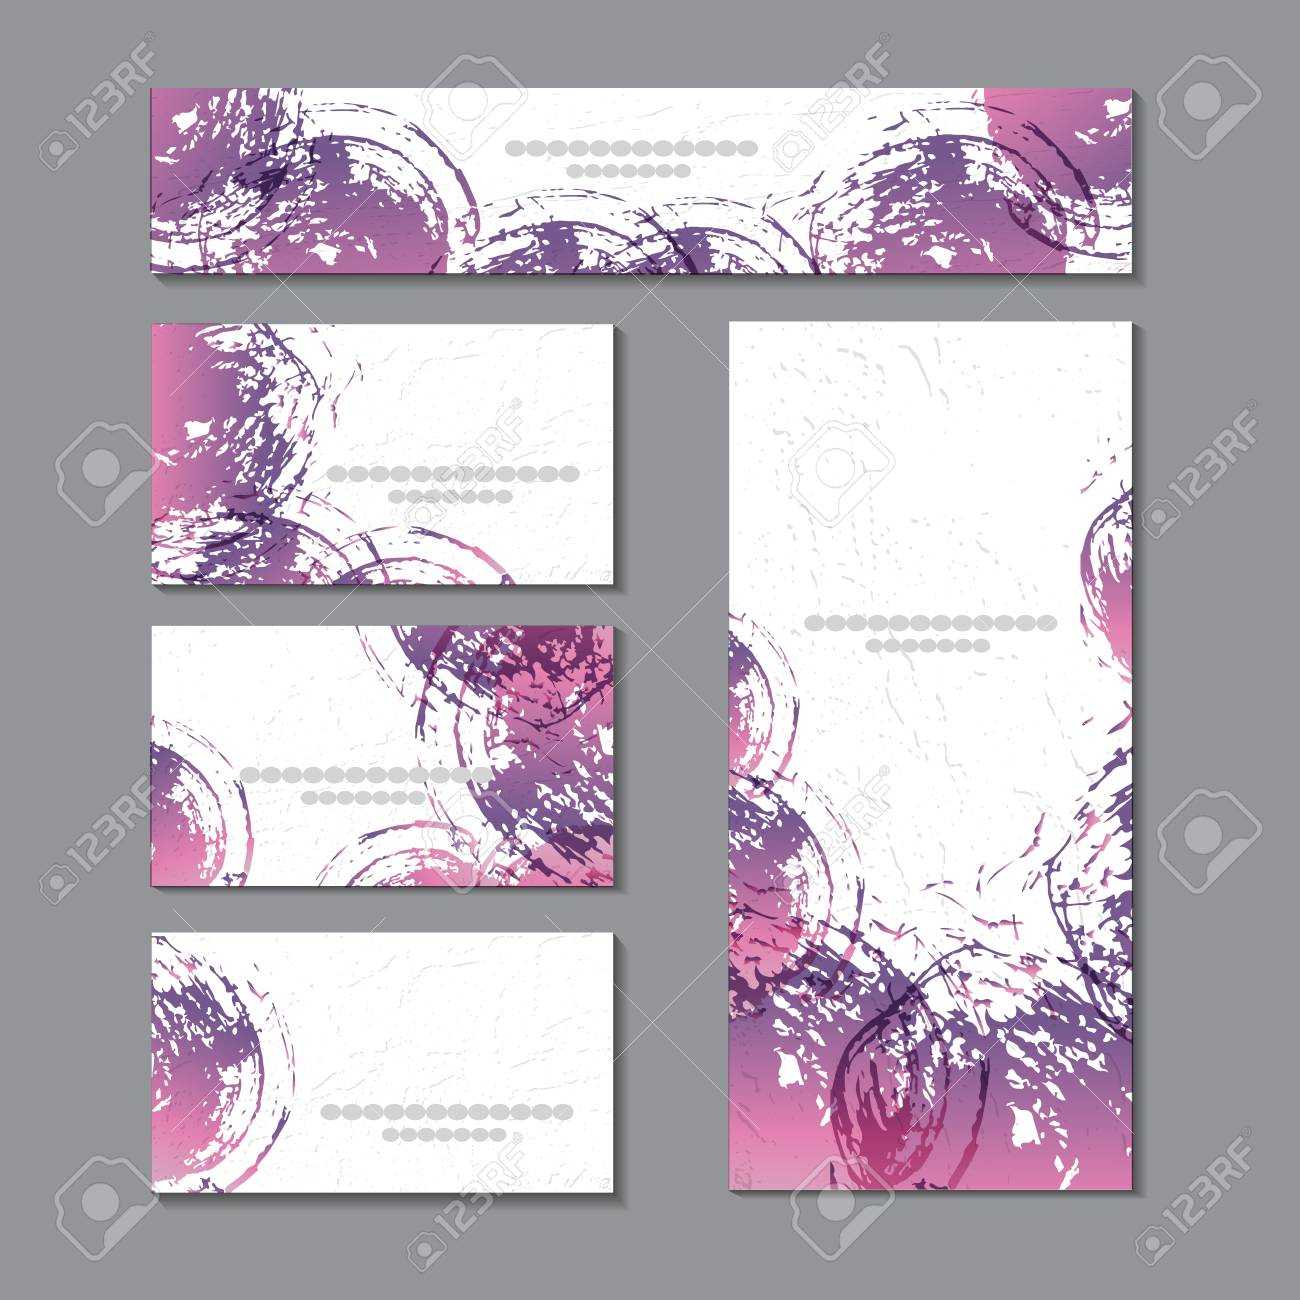 Cute Templates With Abstract Graphics.for Romance And Design,.. In Advertising Cards Templates